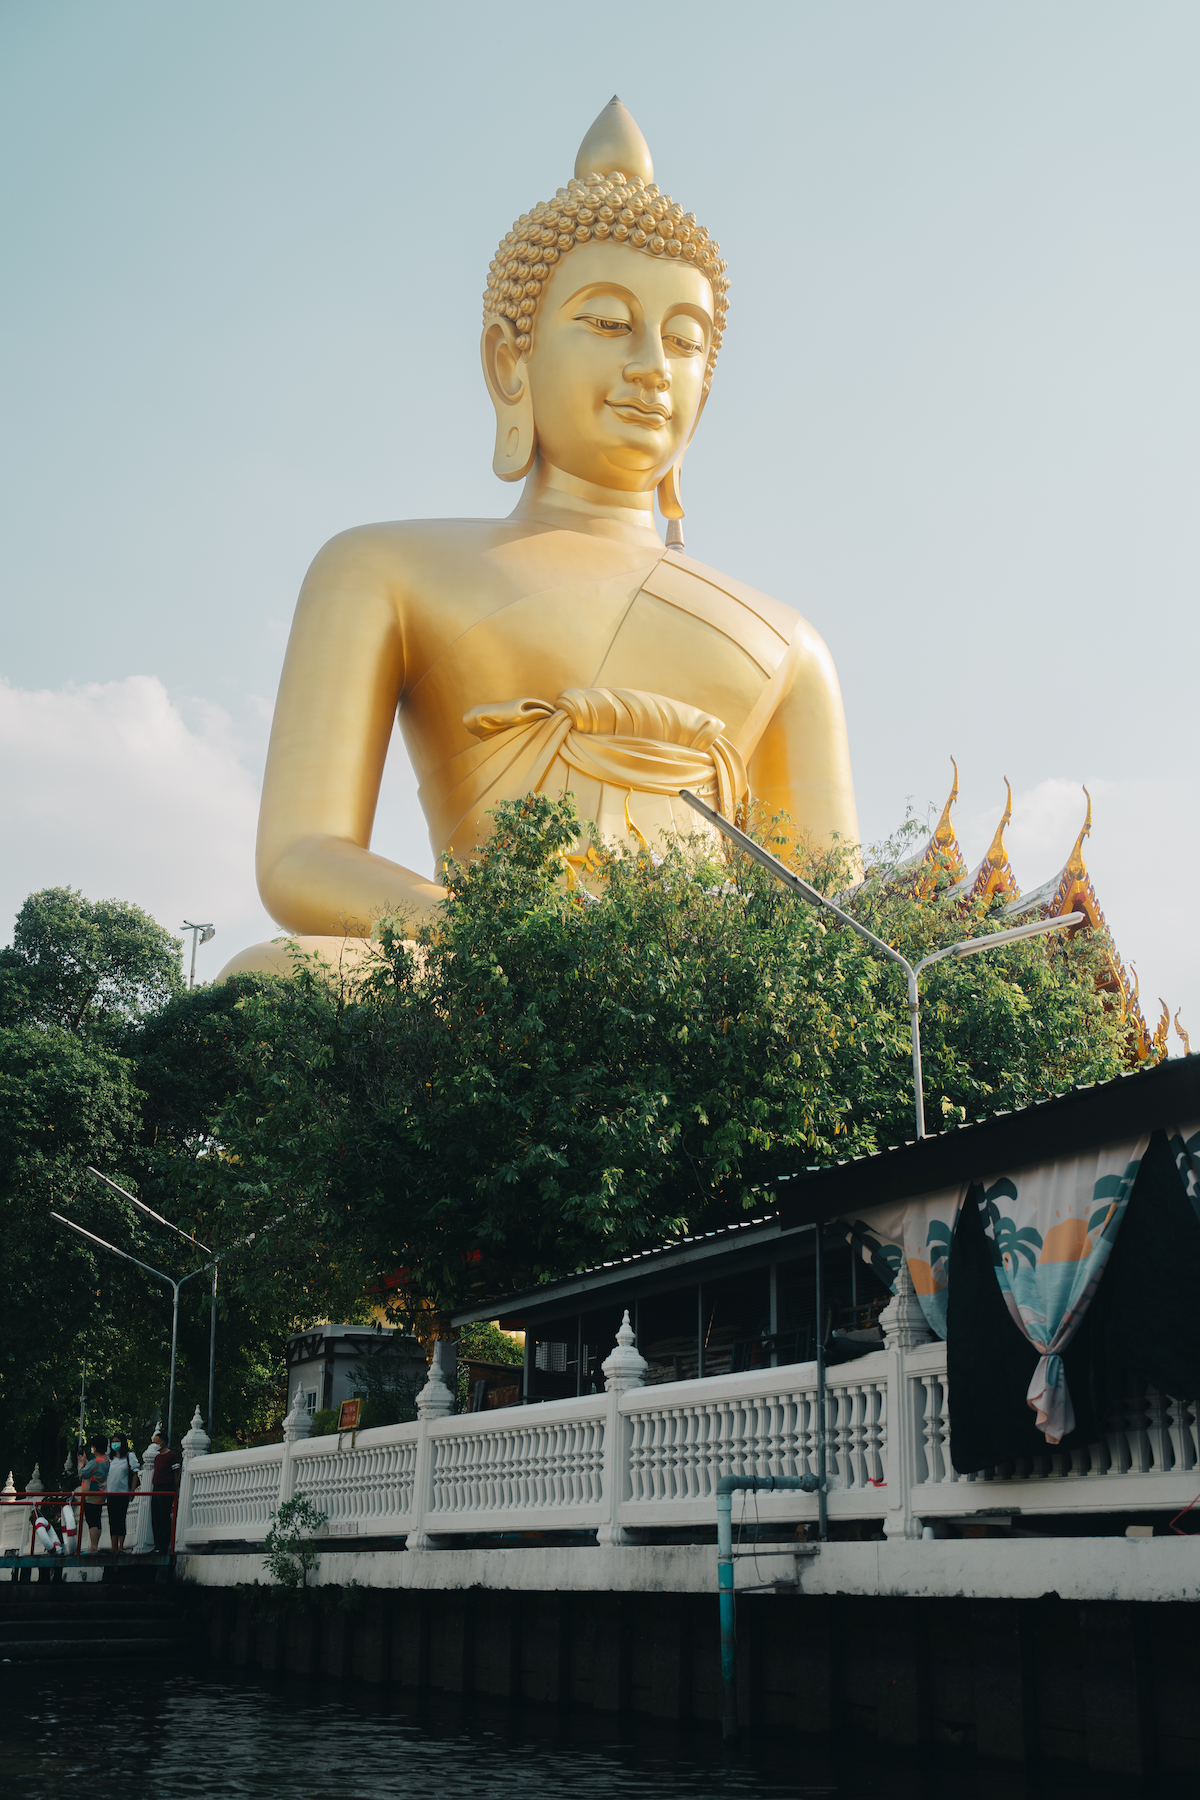 Low-angle view of a large golden Buddha statue from the river